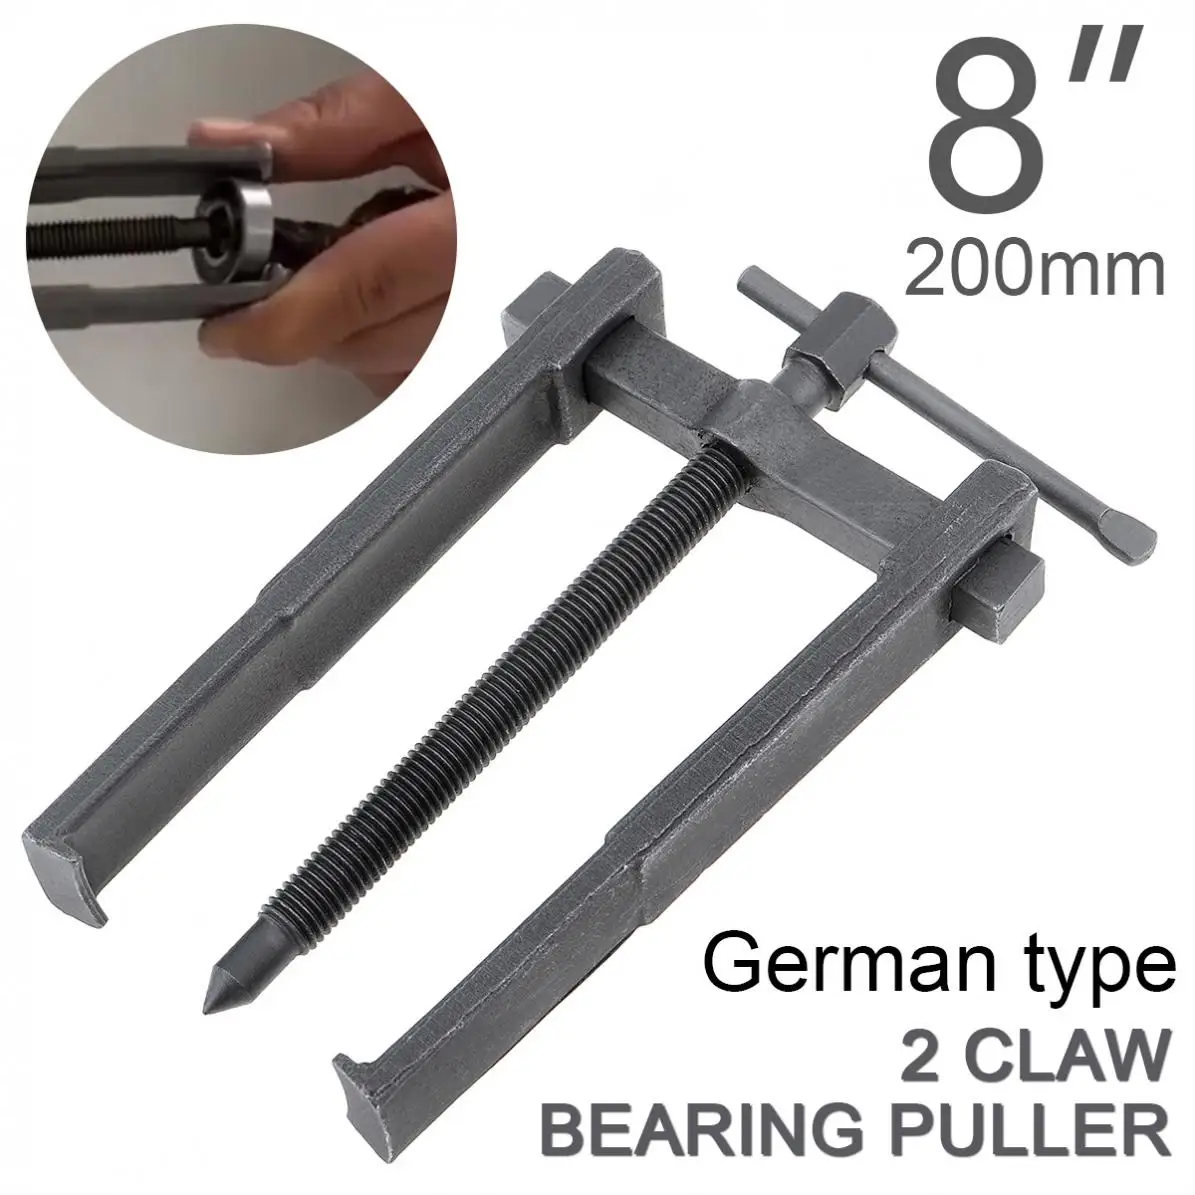 

8 inch Two Claw Puller Separate Lifting Device Pull Bearing German Type Auto Mechanic Hand Tools Bearing Carbon Steel 200mm